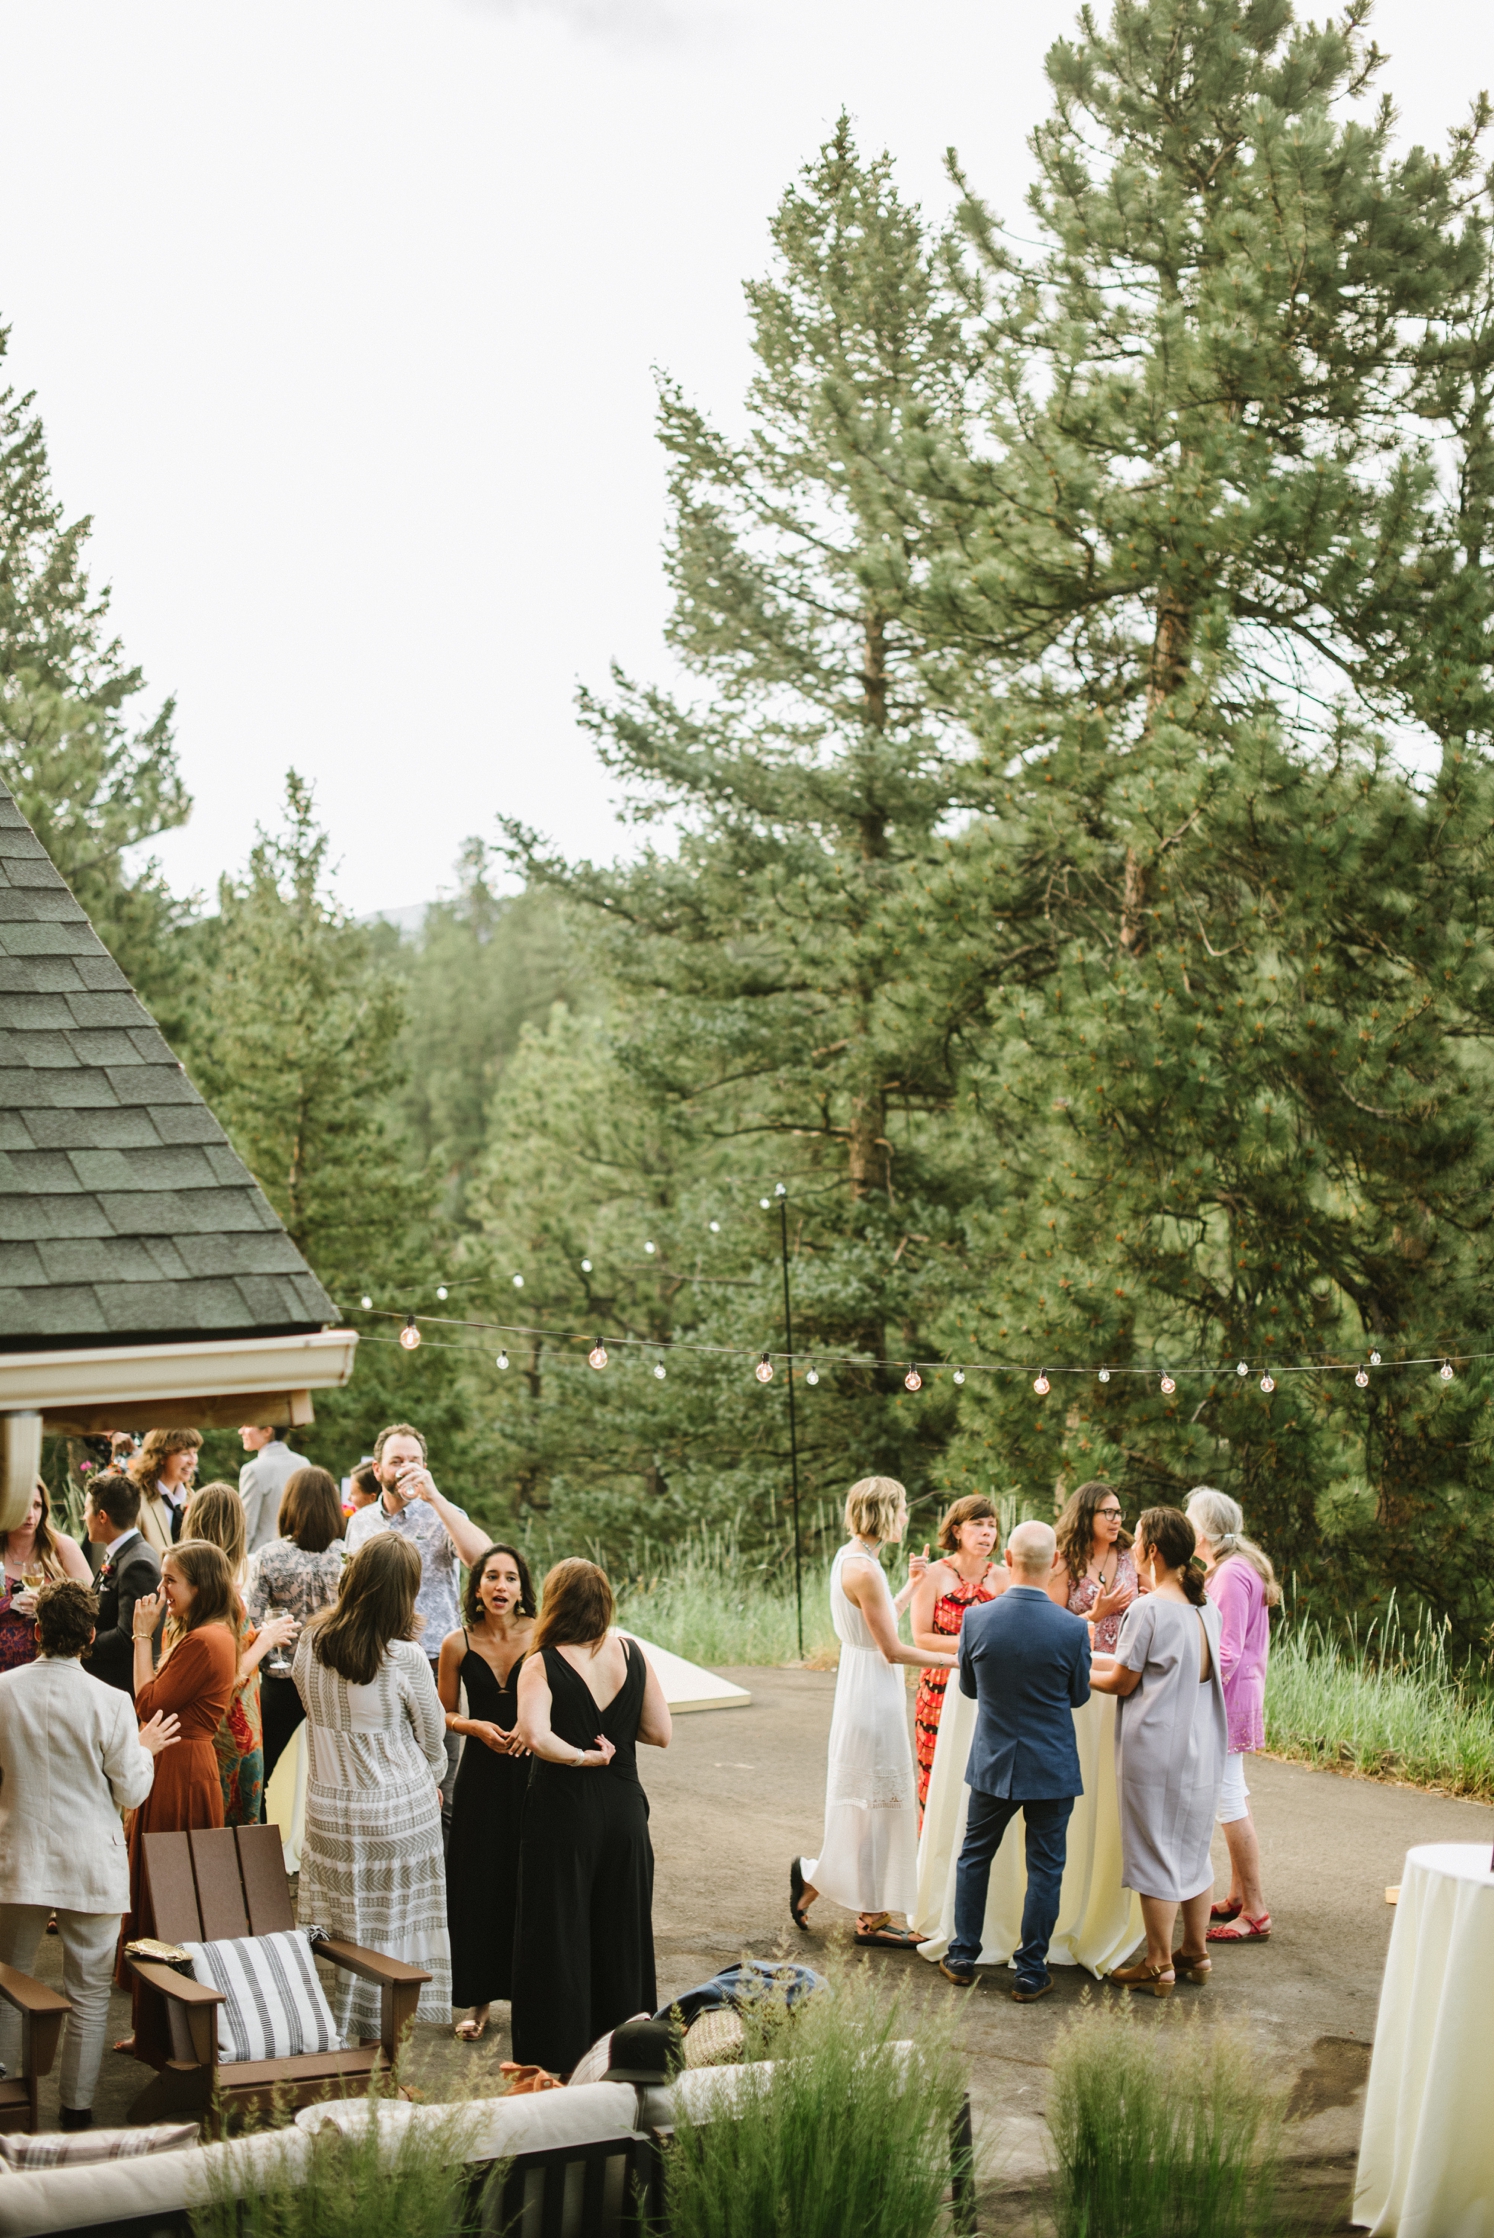 Guests enjoying outdoor cocktail hour at Juniper Mountain House | McArthur Weddings and Events